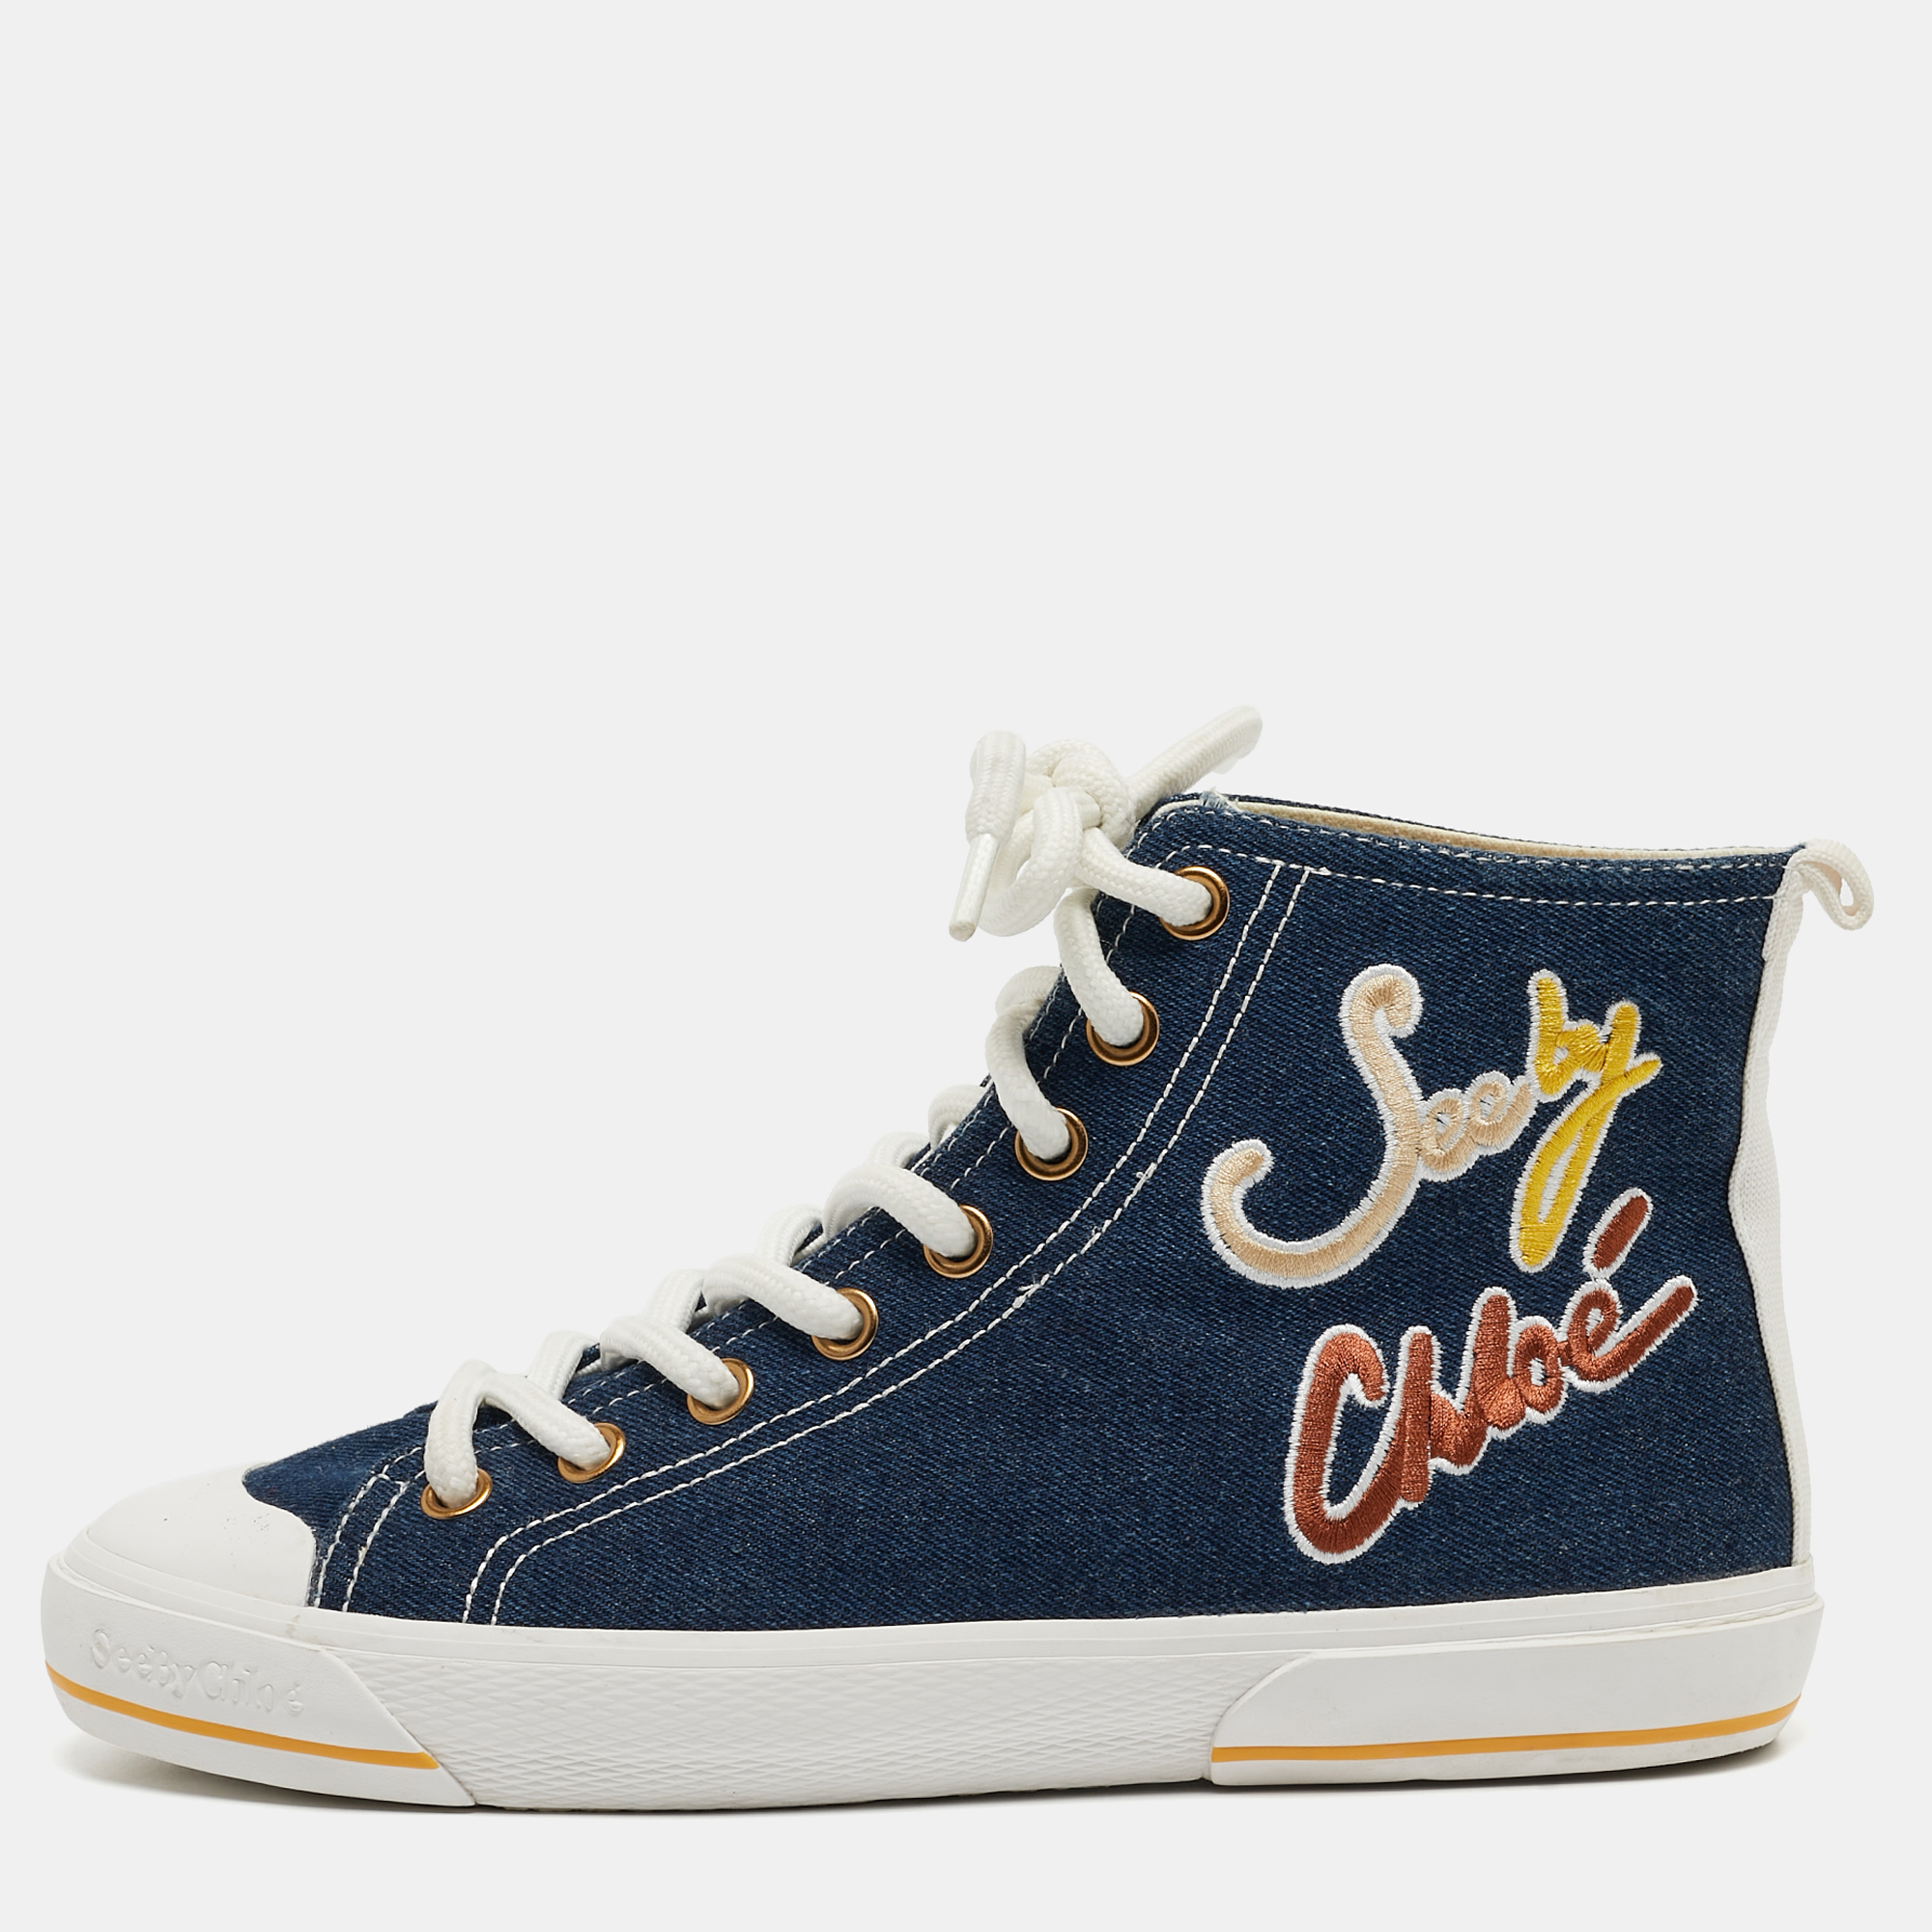 See by chlo&eacute; blue demin high top sneakers size 40